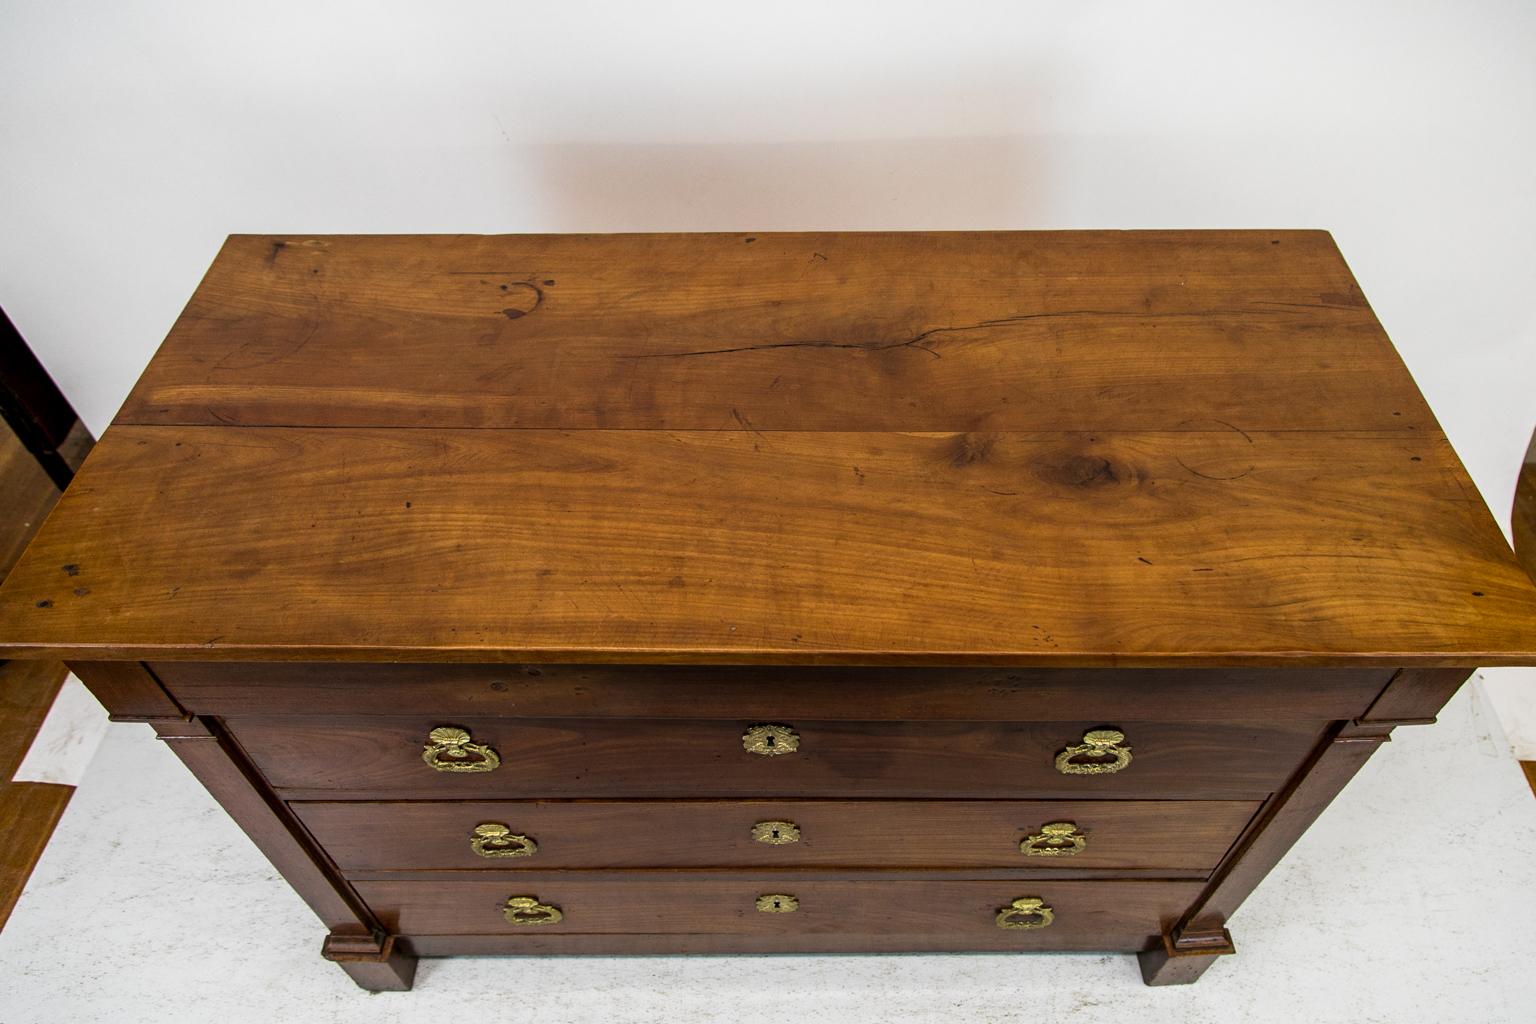 This four-drawer chest or commode is made of French cherry. The top is 23